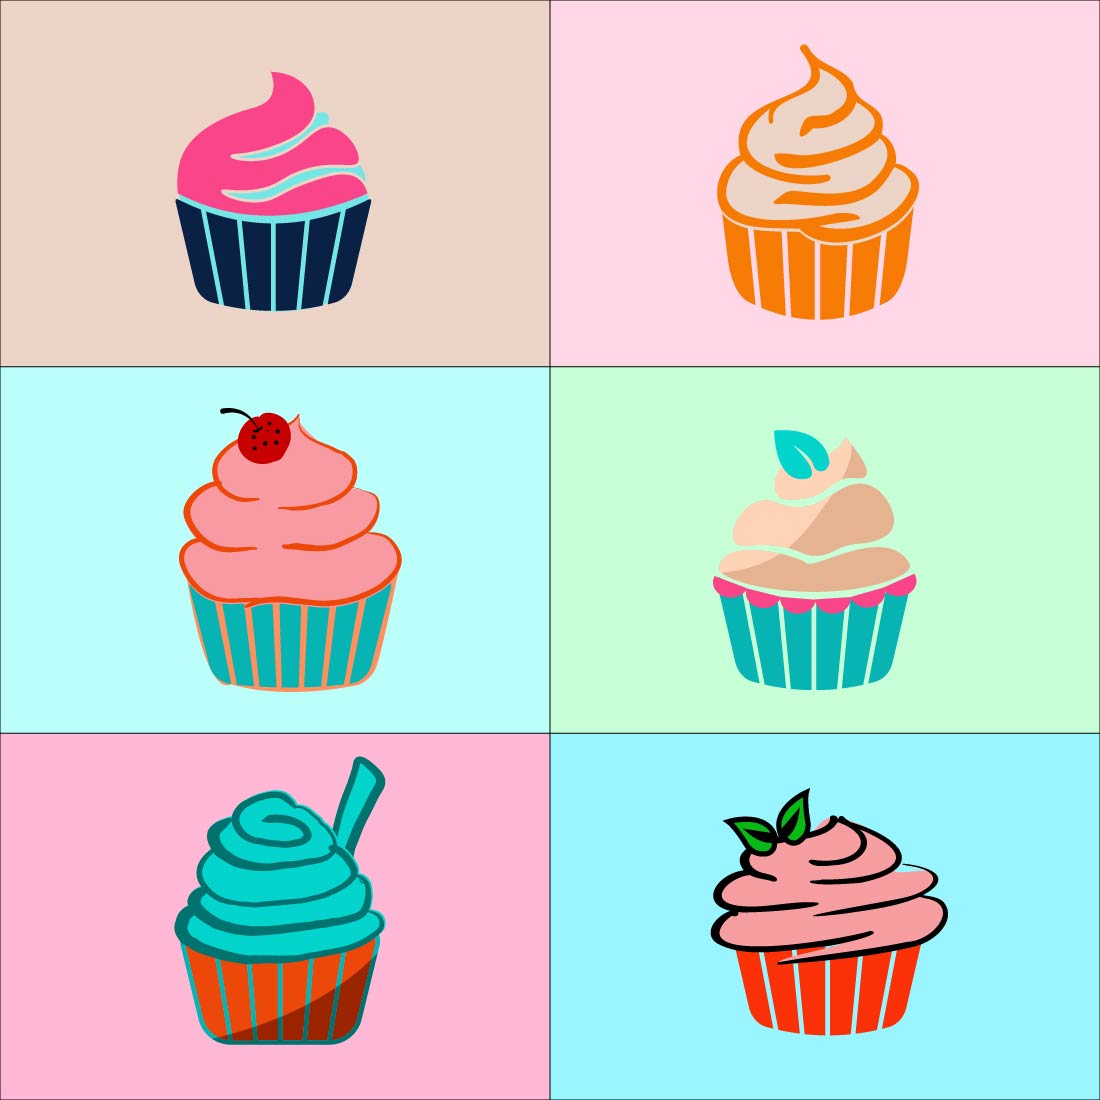 Cupcake Icon Collection cover image.